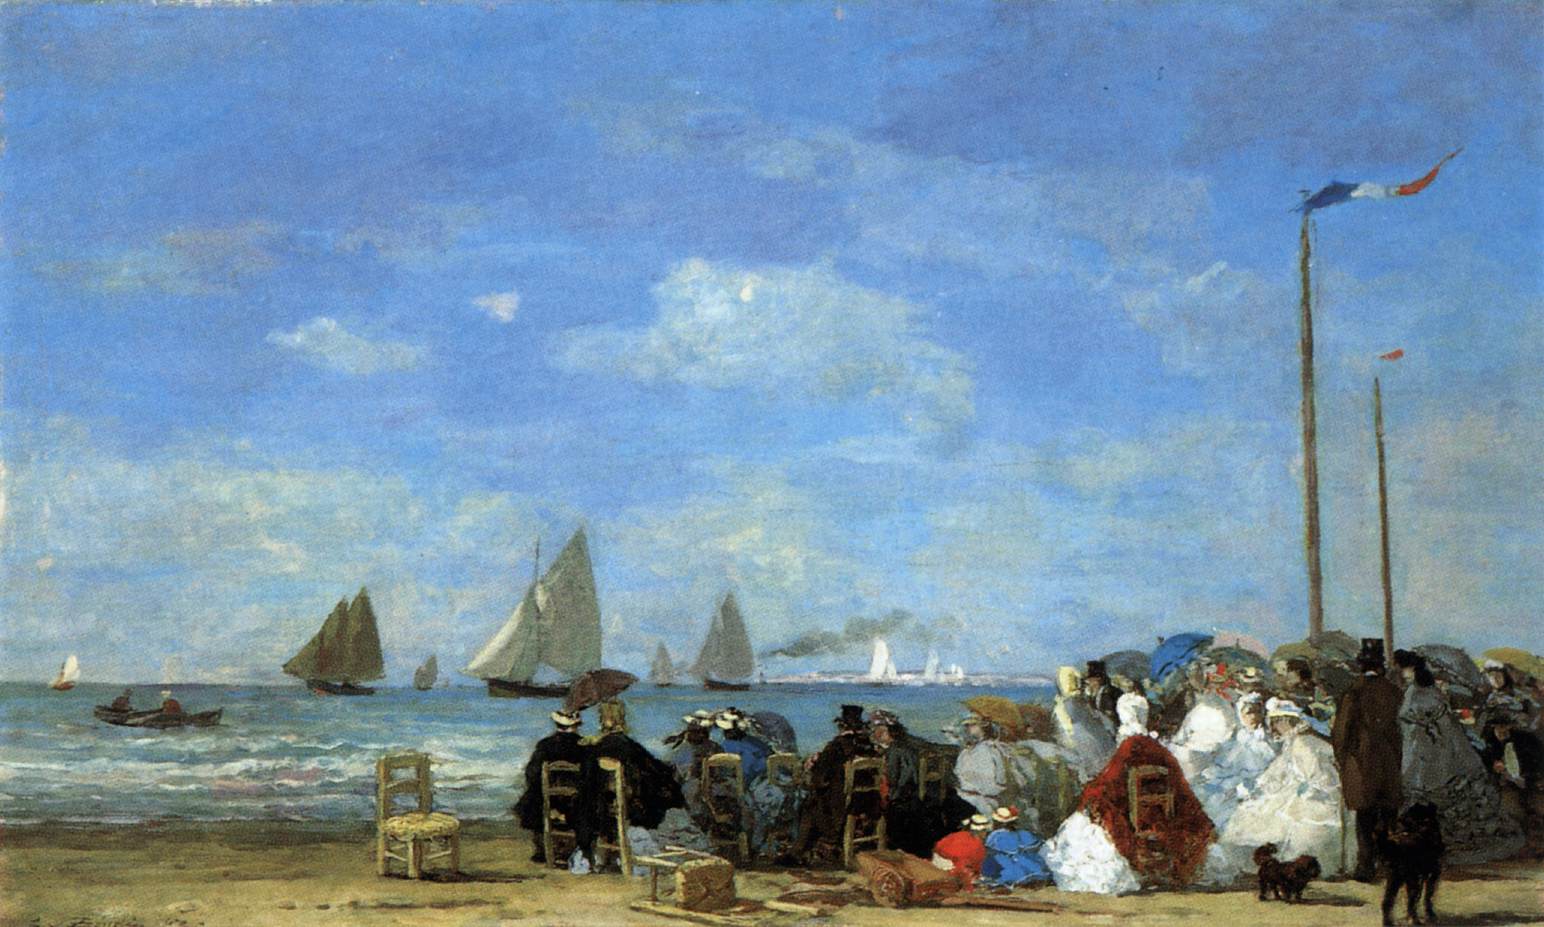 Scene from The Beach, Troubille